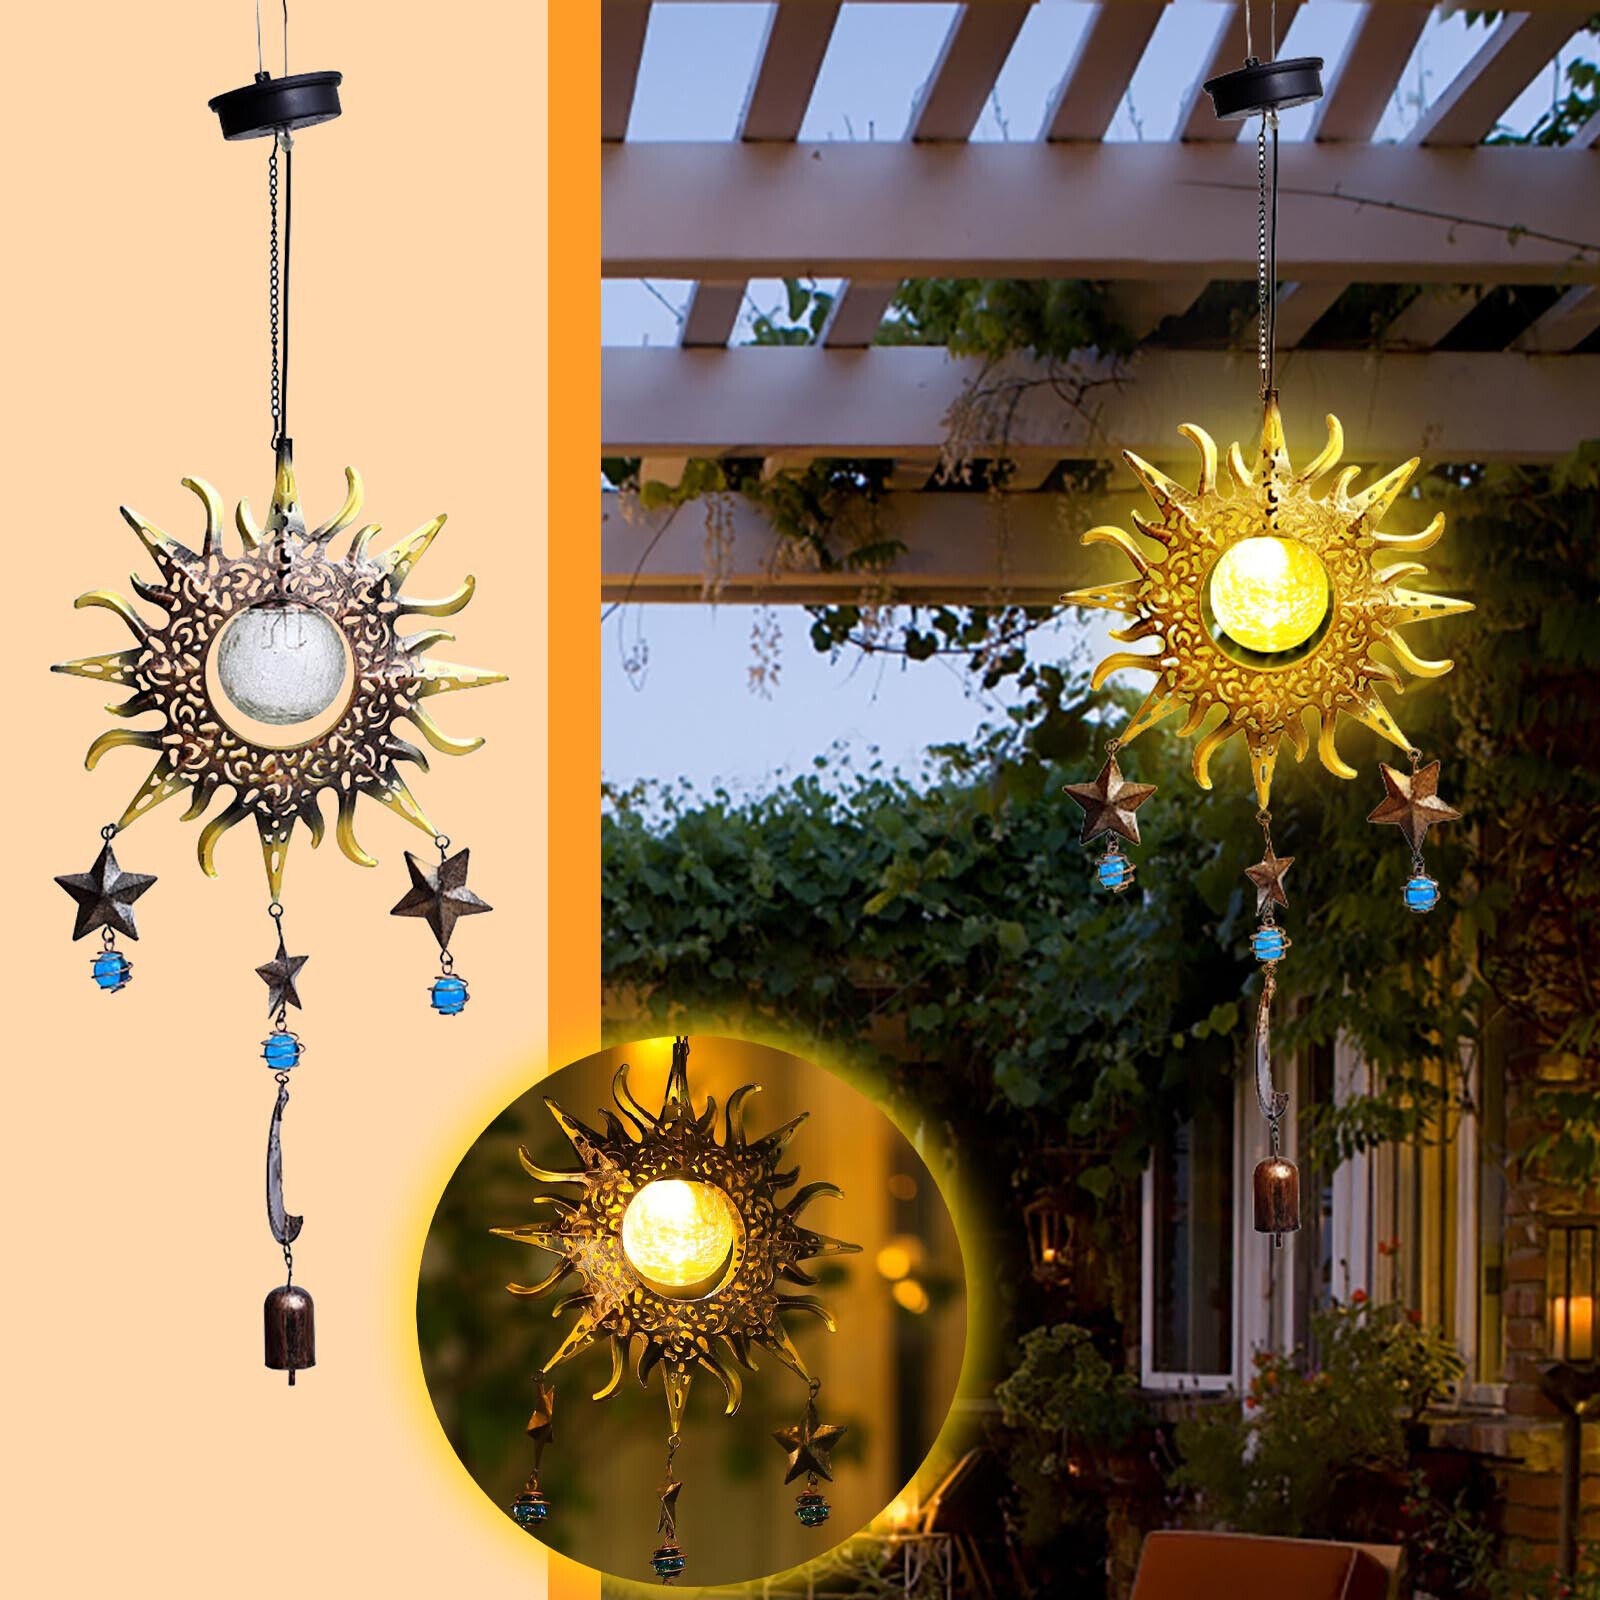 🎇New Arrival - LED Waterproof Solar Wind Chime-EchoDecor